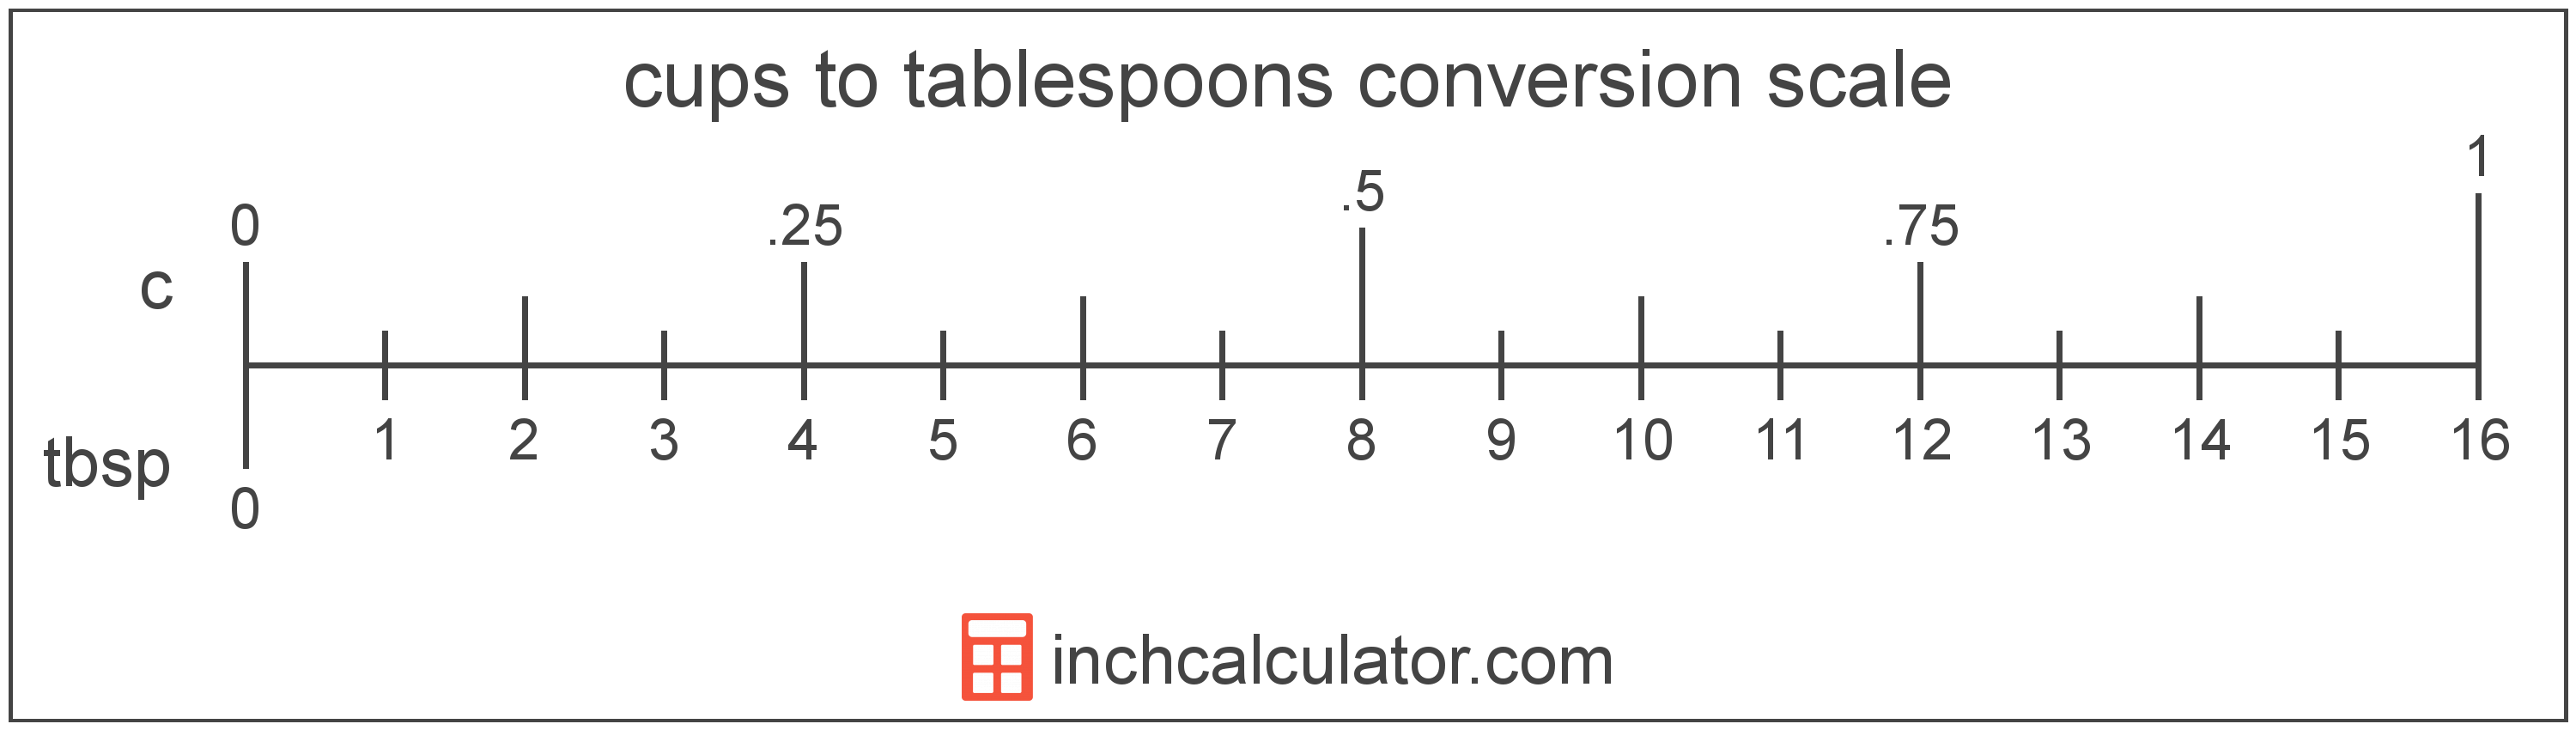 Cups to Tablespoons Conversion (c to tbsp) - Inch Calculator